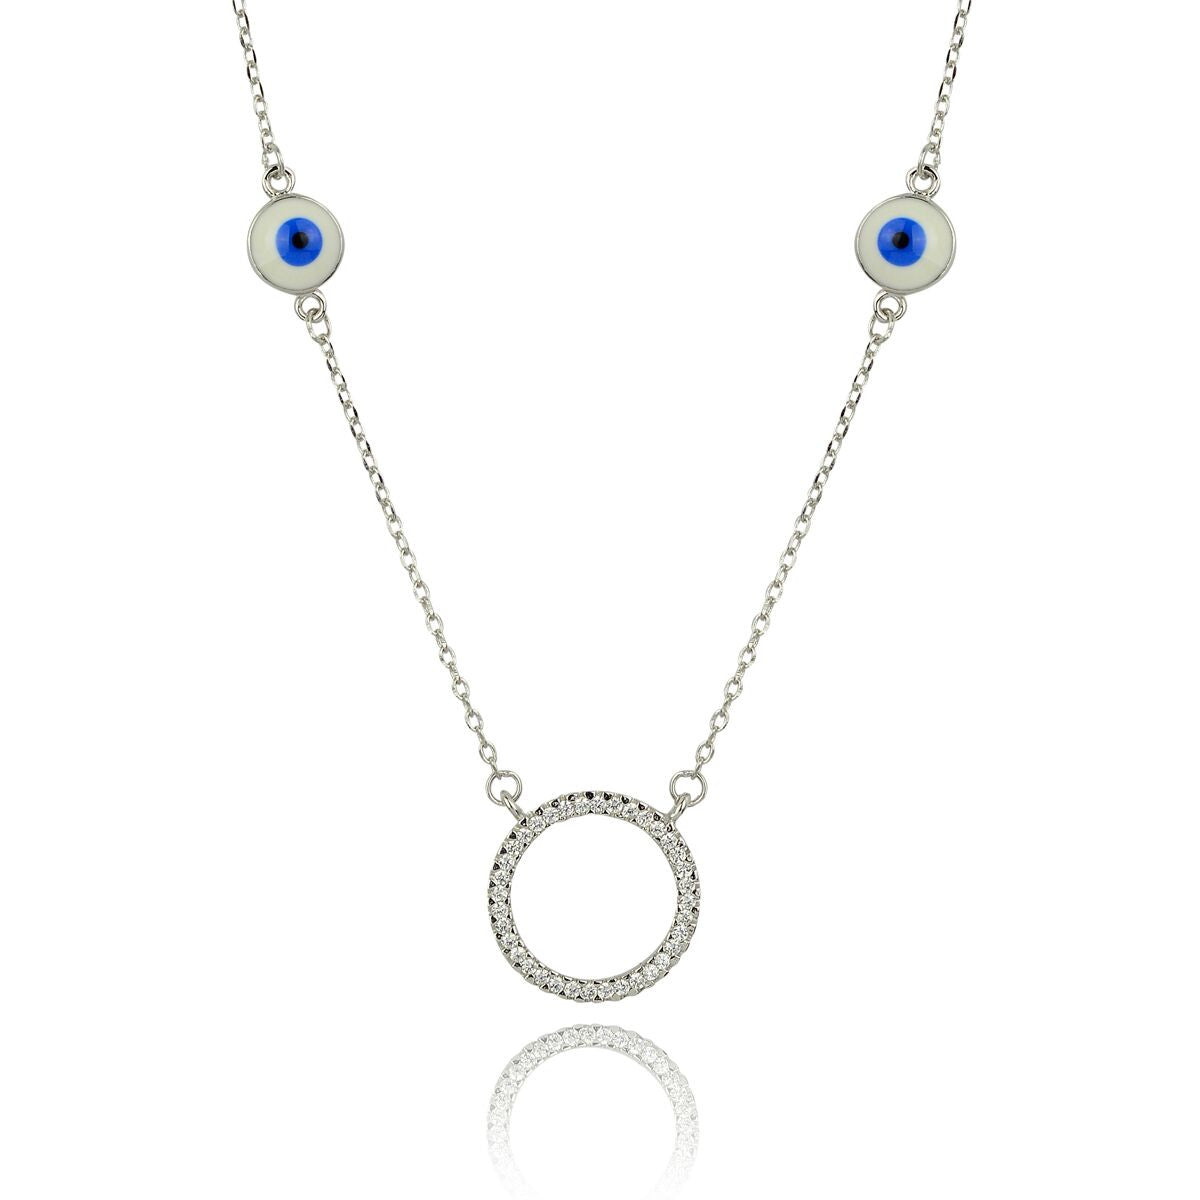 EYE SEE YOU STERLING SILVER NECKLACE